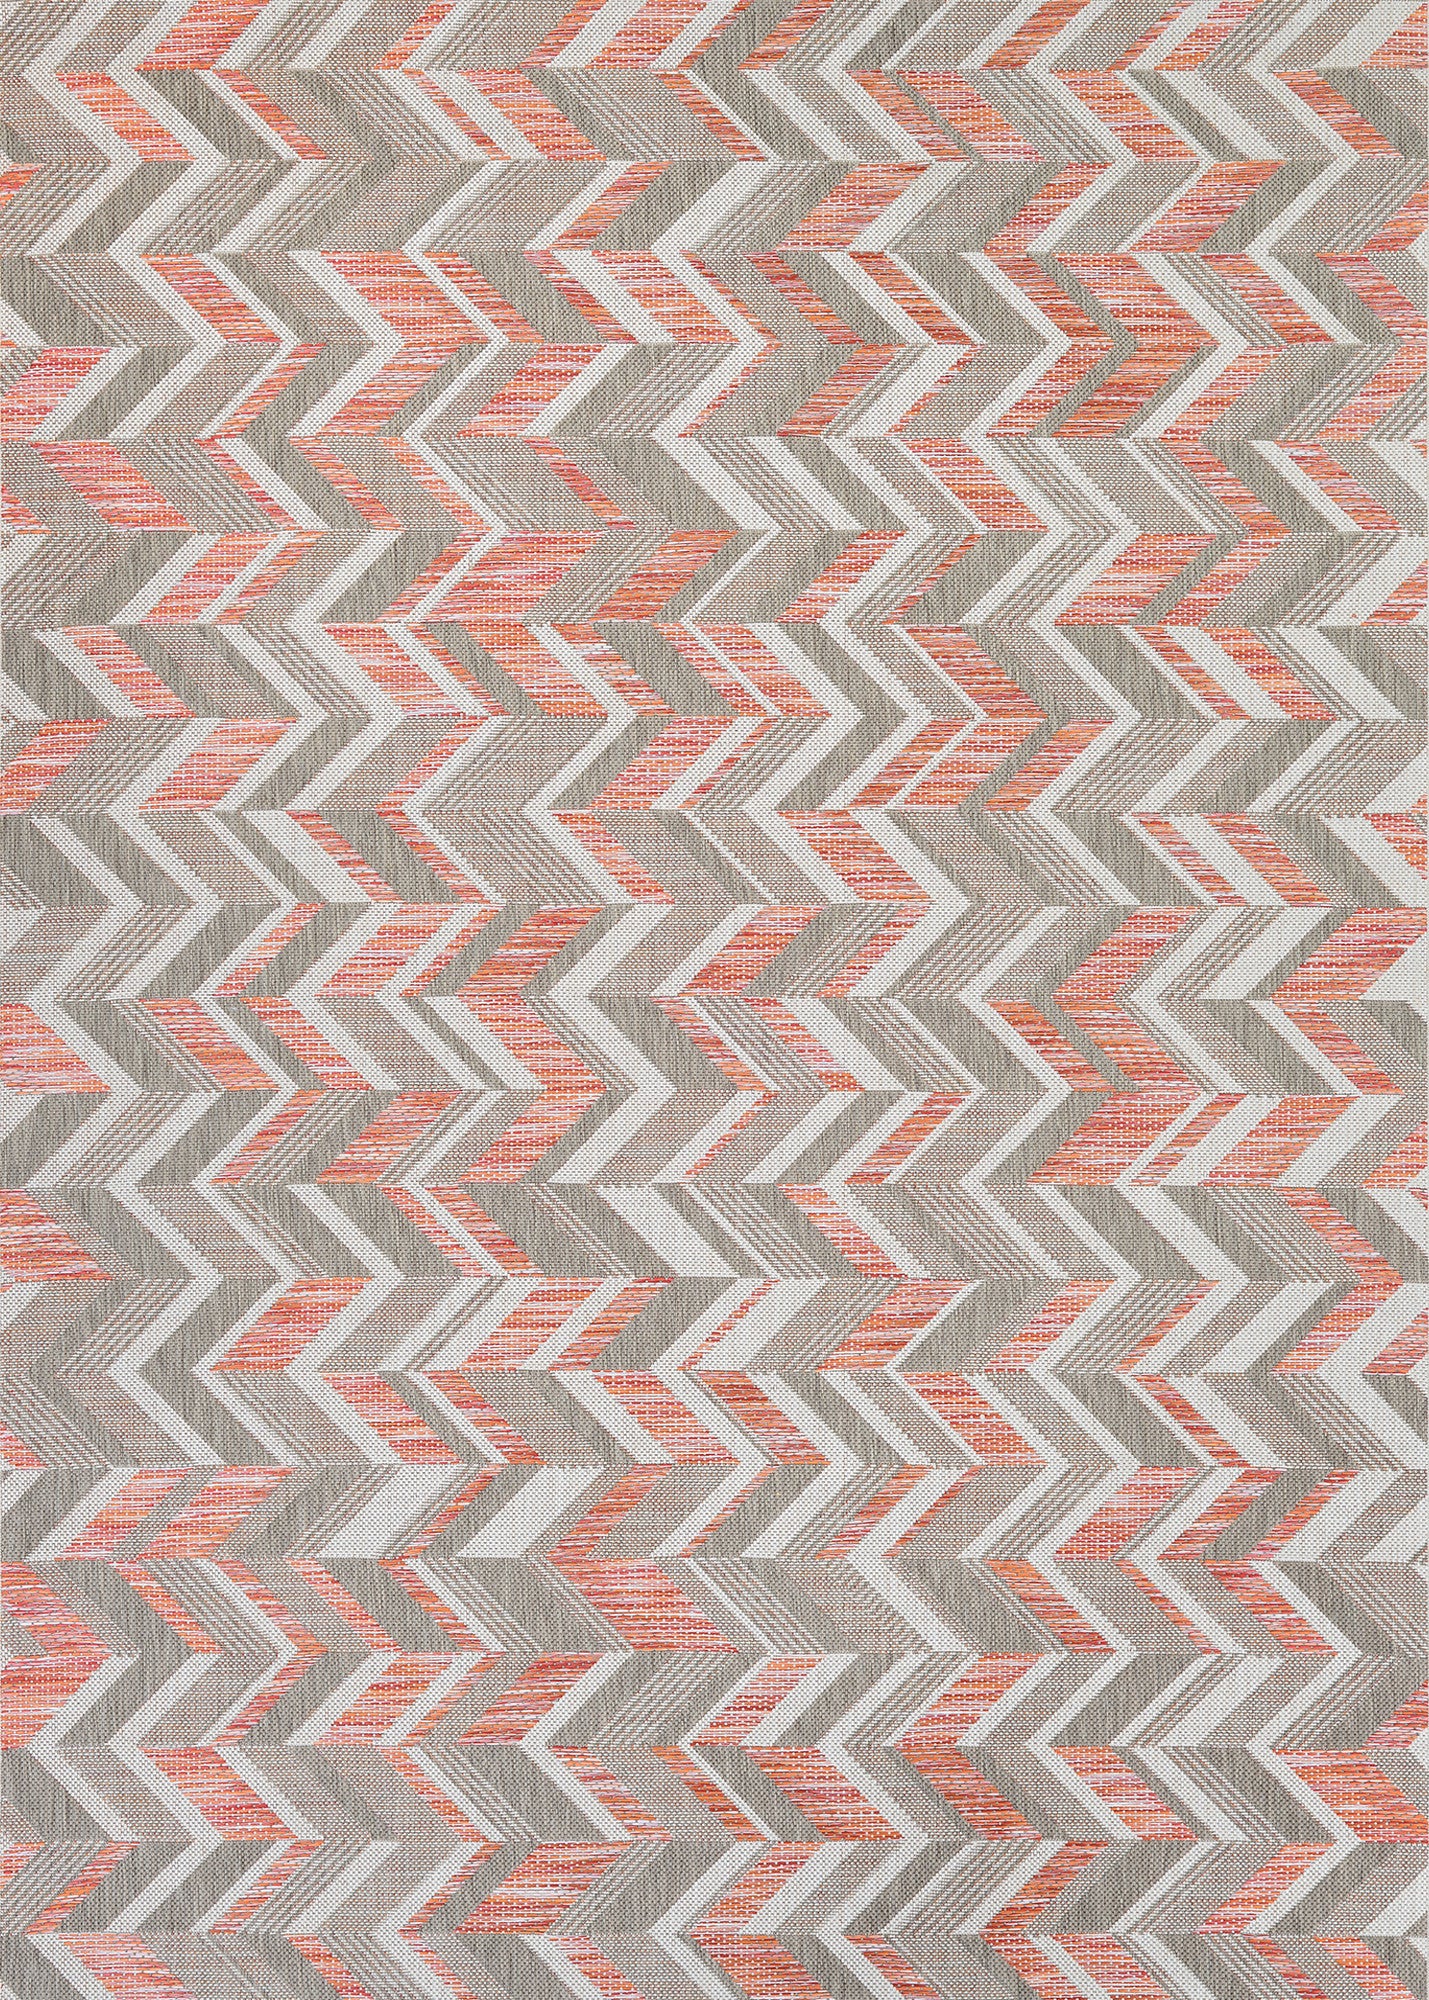 Couristan Tides Shelter Island Sienna Red/Grey Area Rug